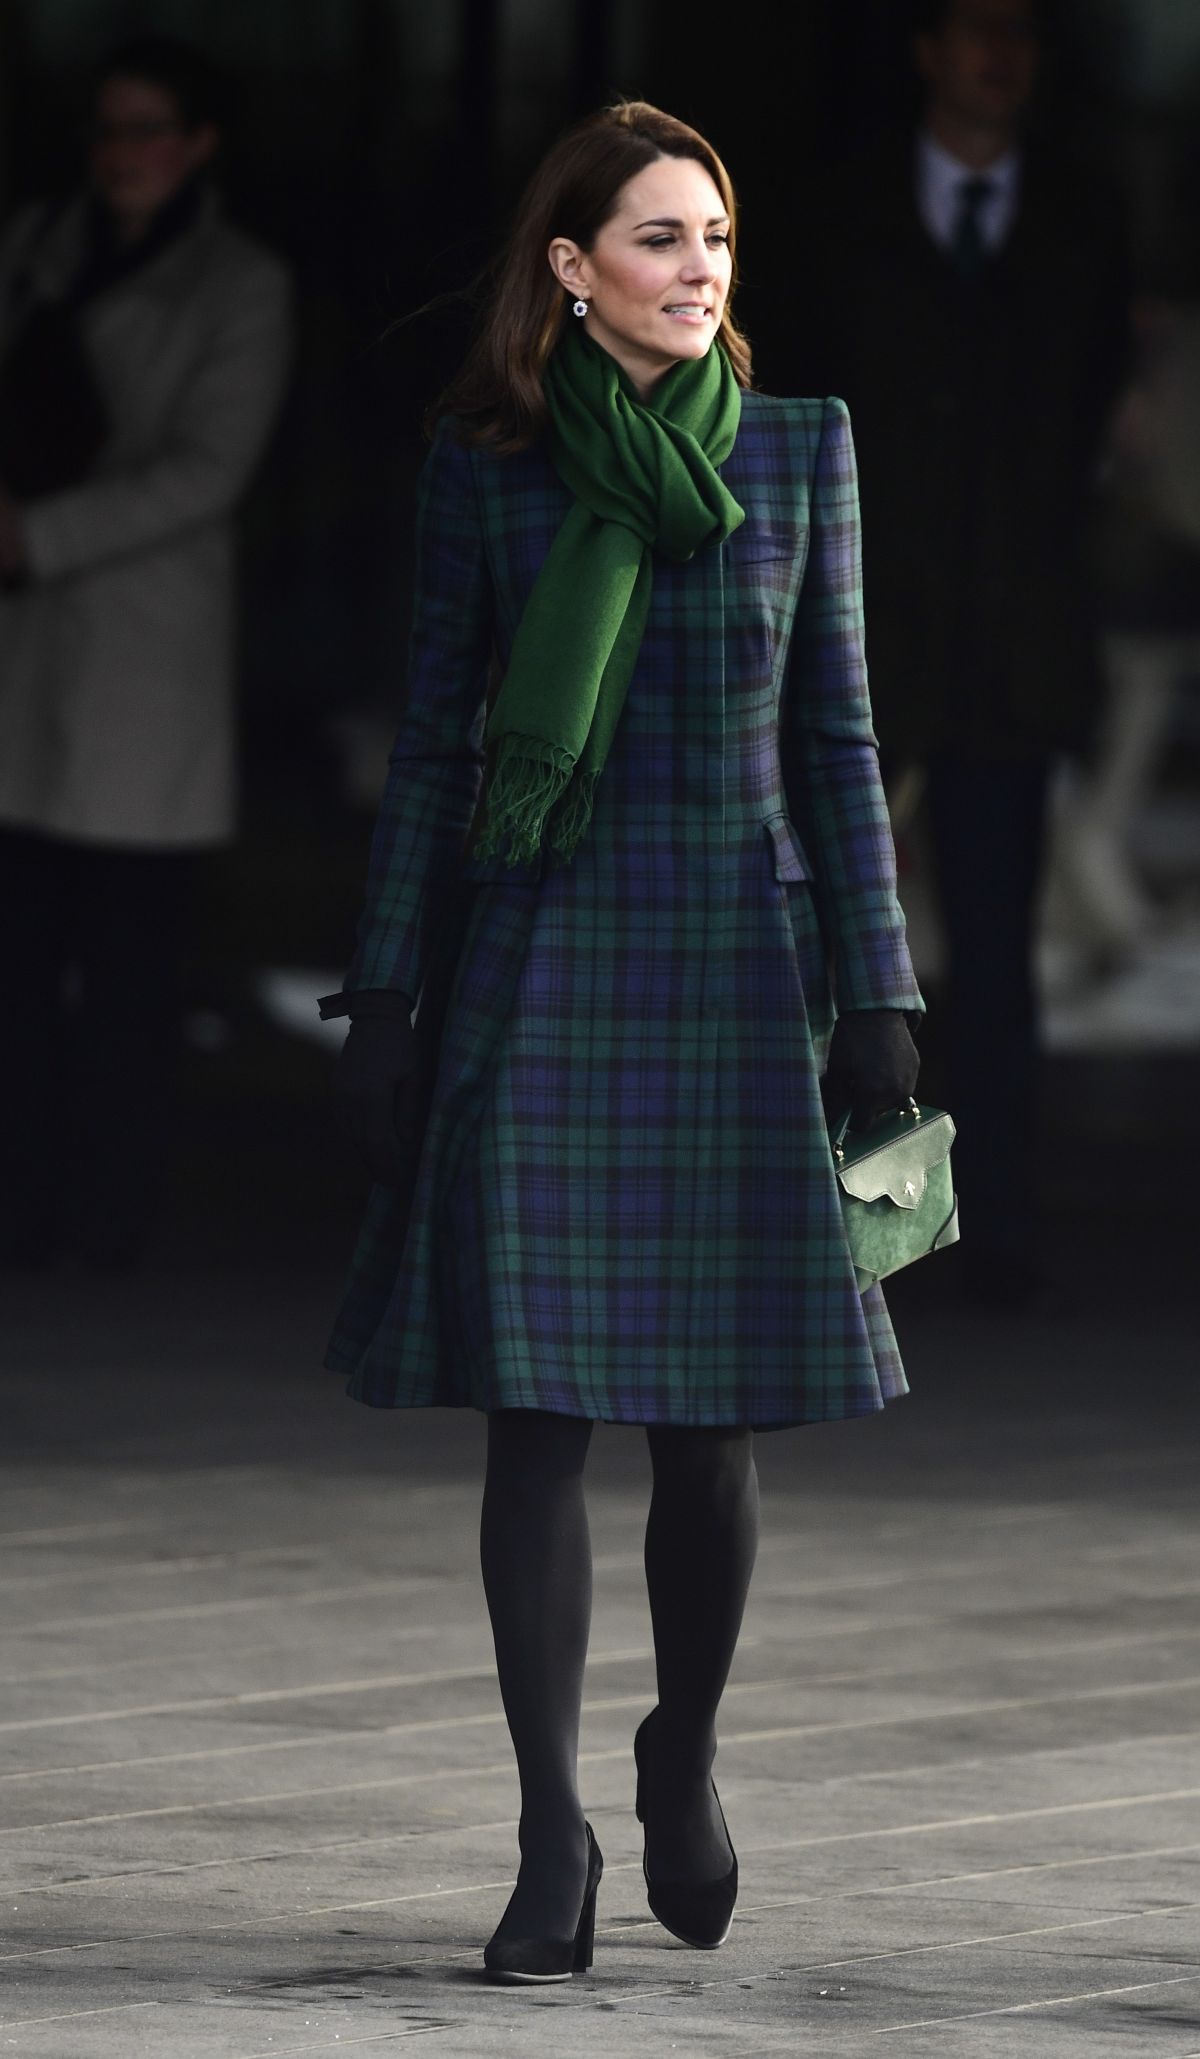 KATE MIDDLETON at V&A Dundee Opening in Dundee 01/29/2019 – HawtCelebs